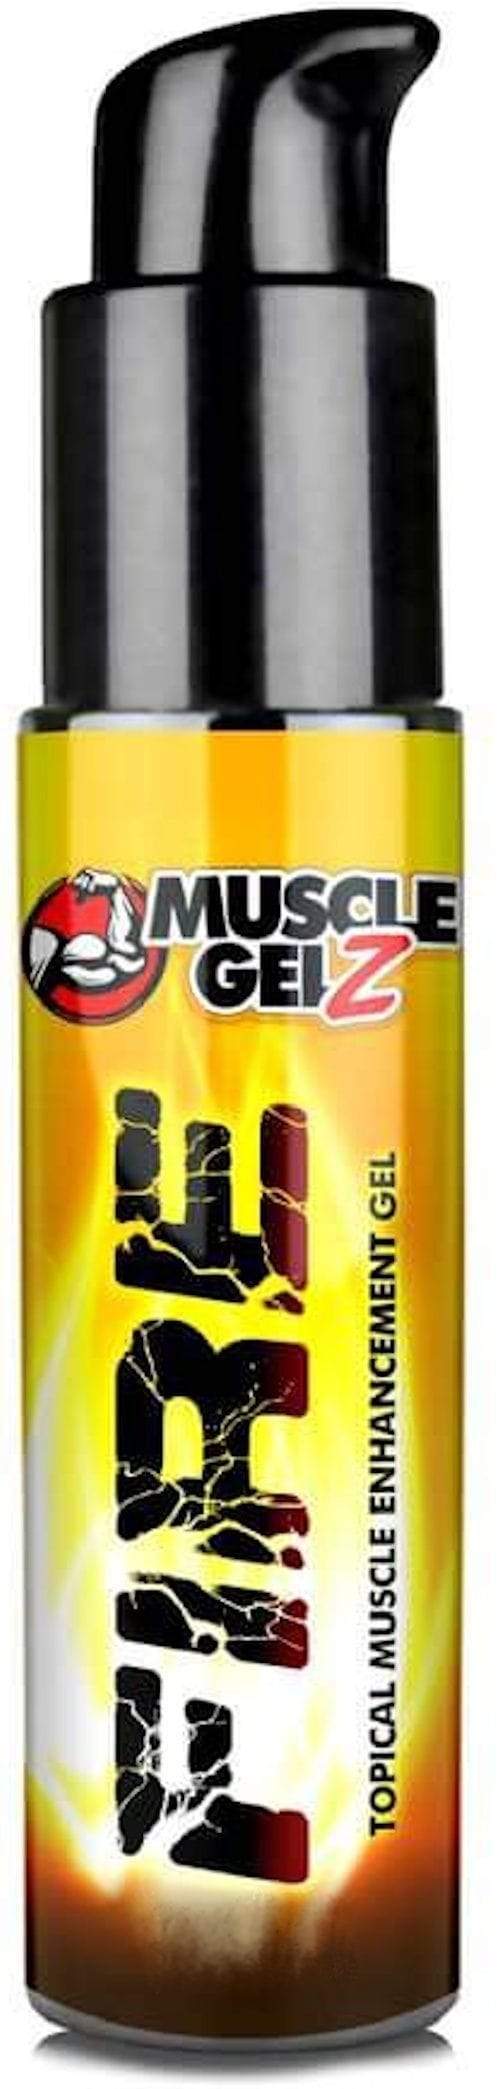 Muscle Gelz Fire|Lowcostvitamin.com